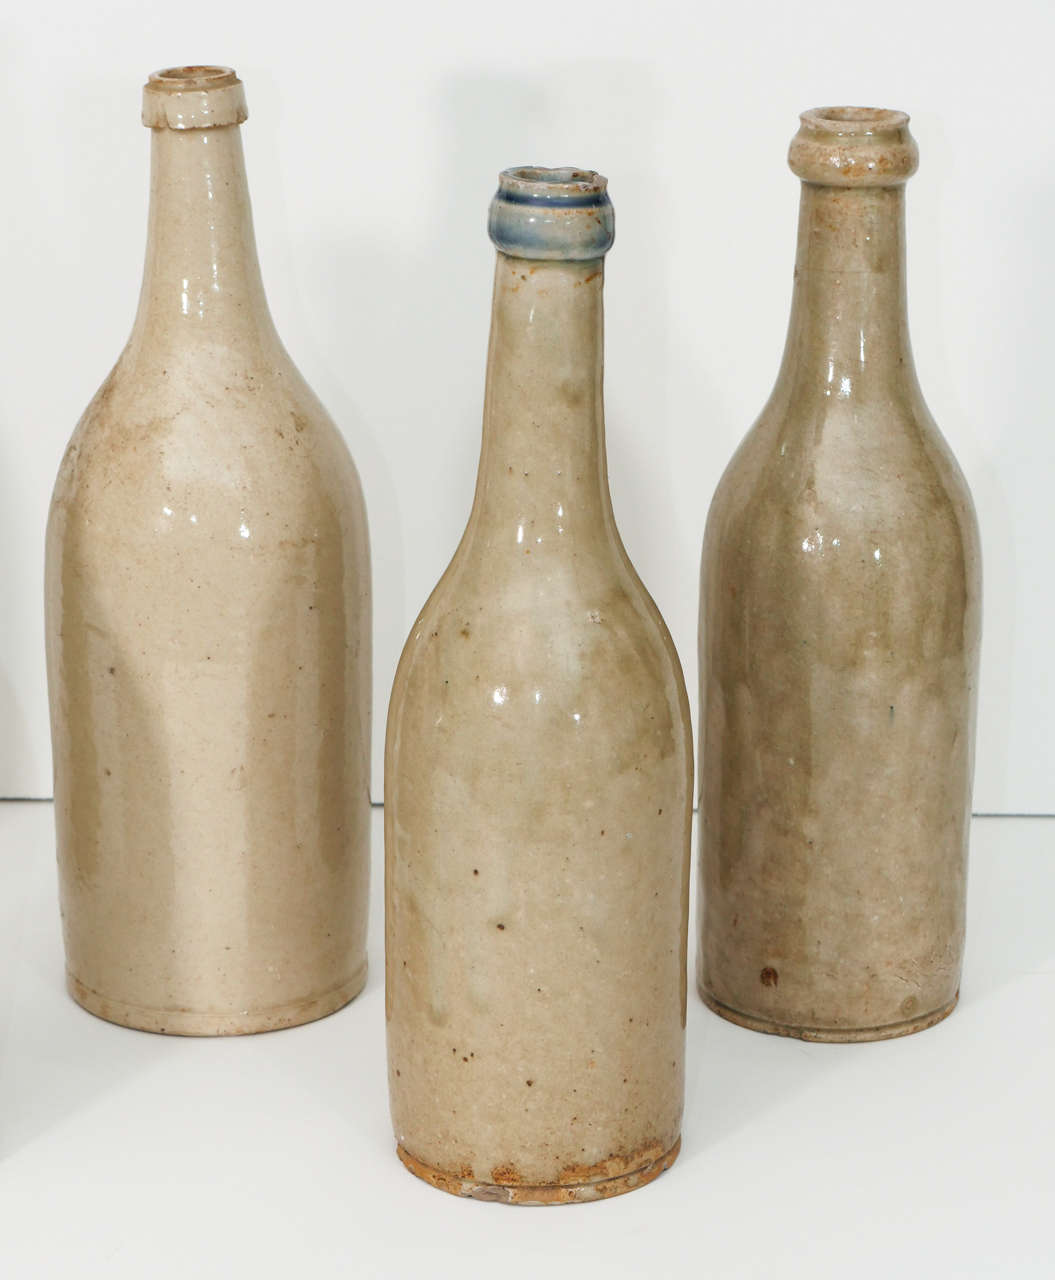 A collection of wine bottles from the Anjou region of France with a lovely, grey/green glaze.  These would be great as a centerpiece or as accessories in a kitchen. Priced separately.